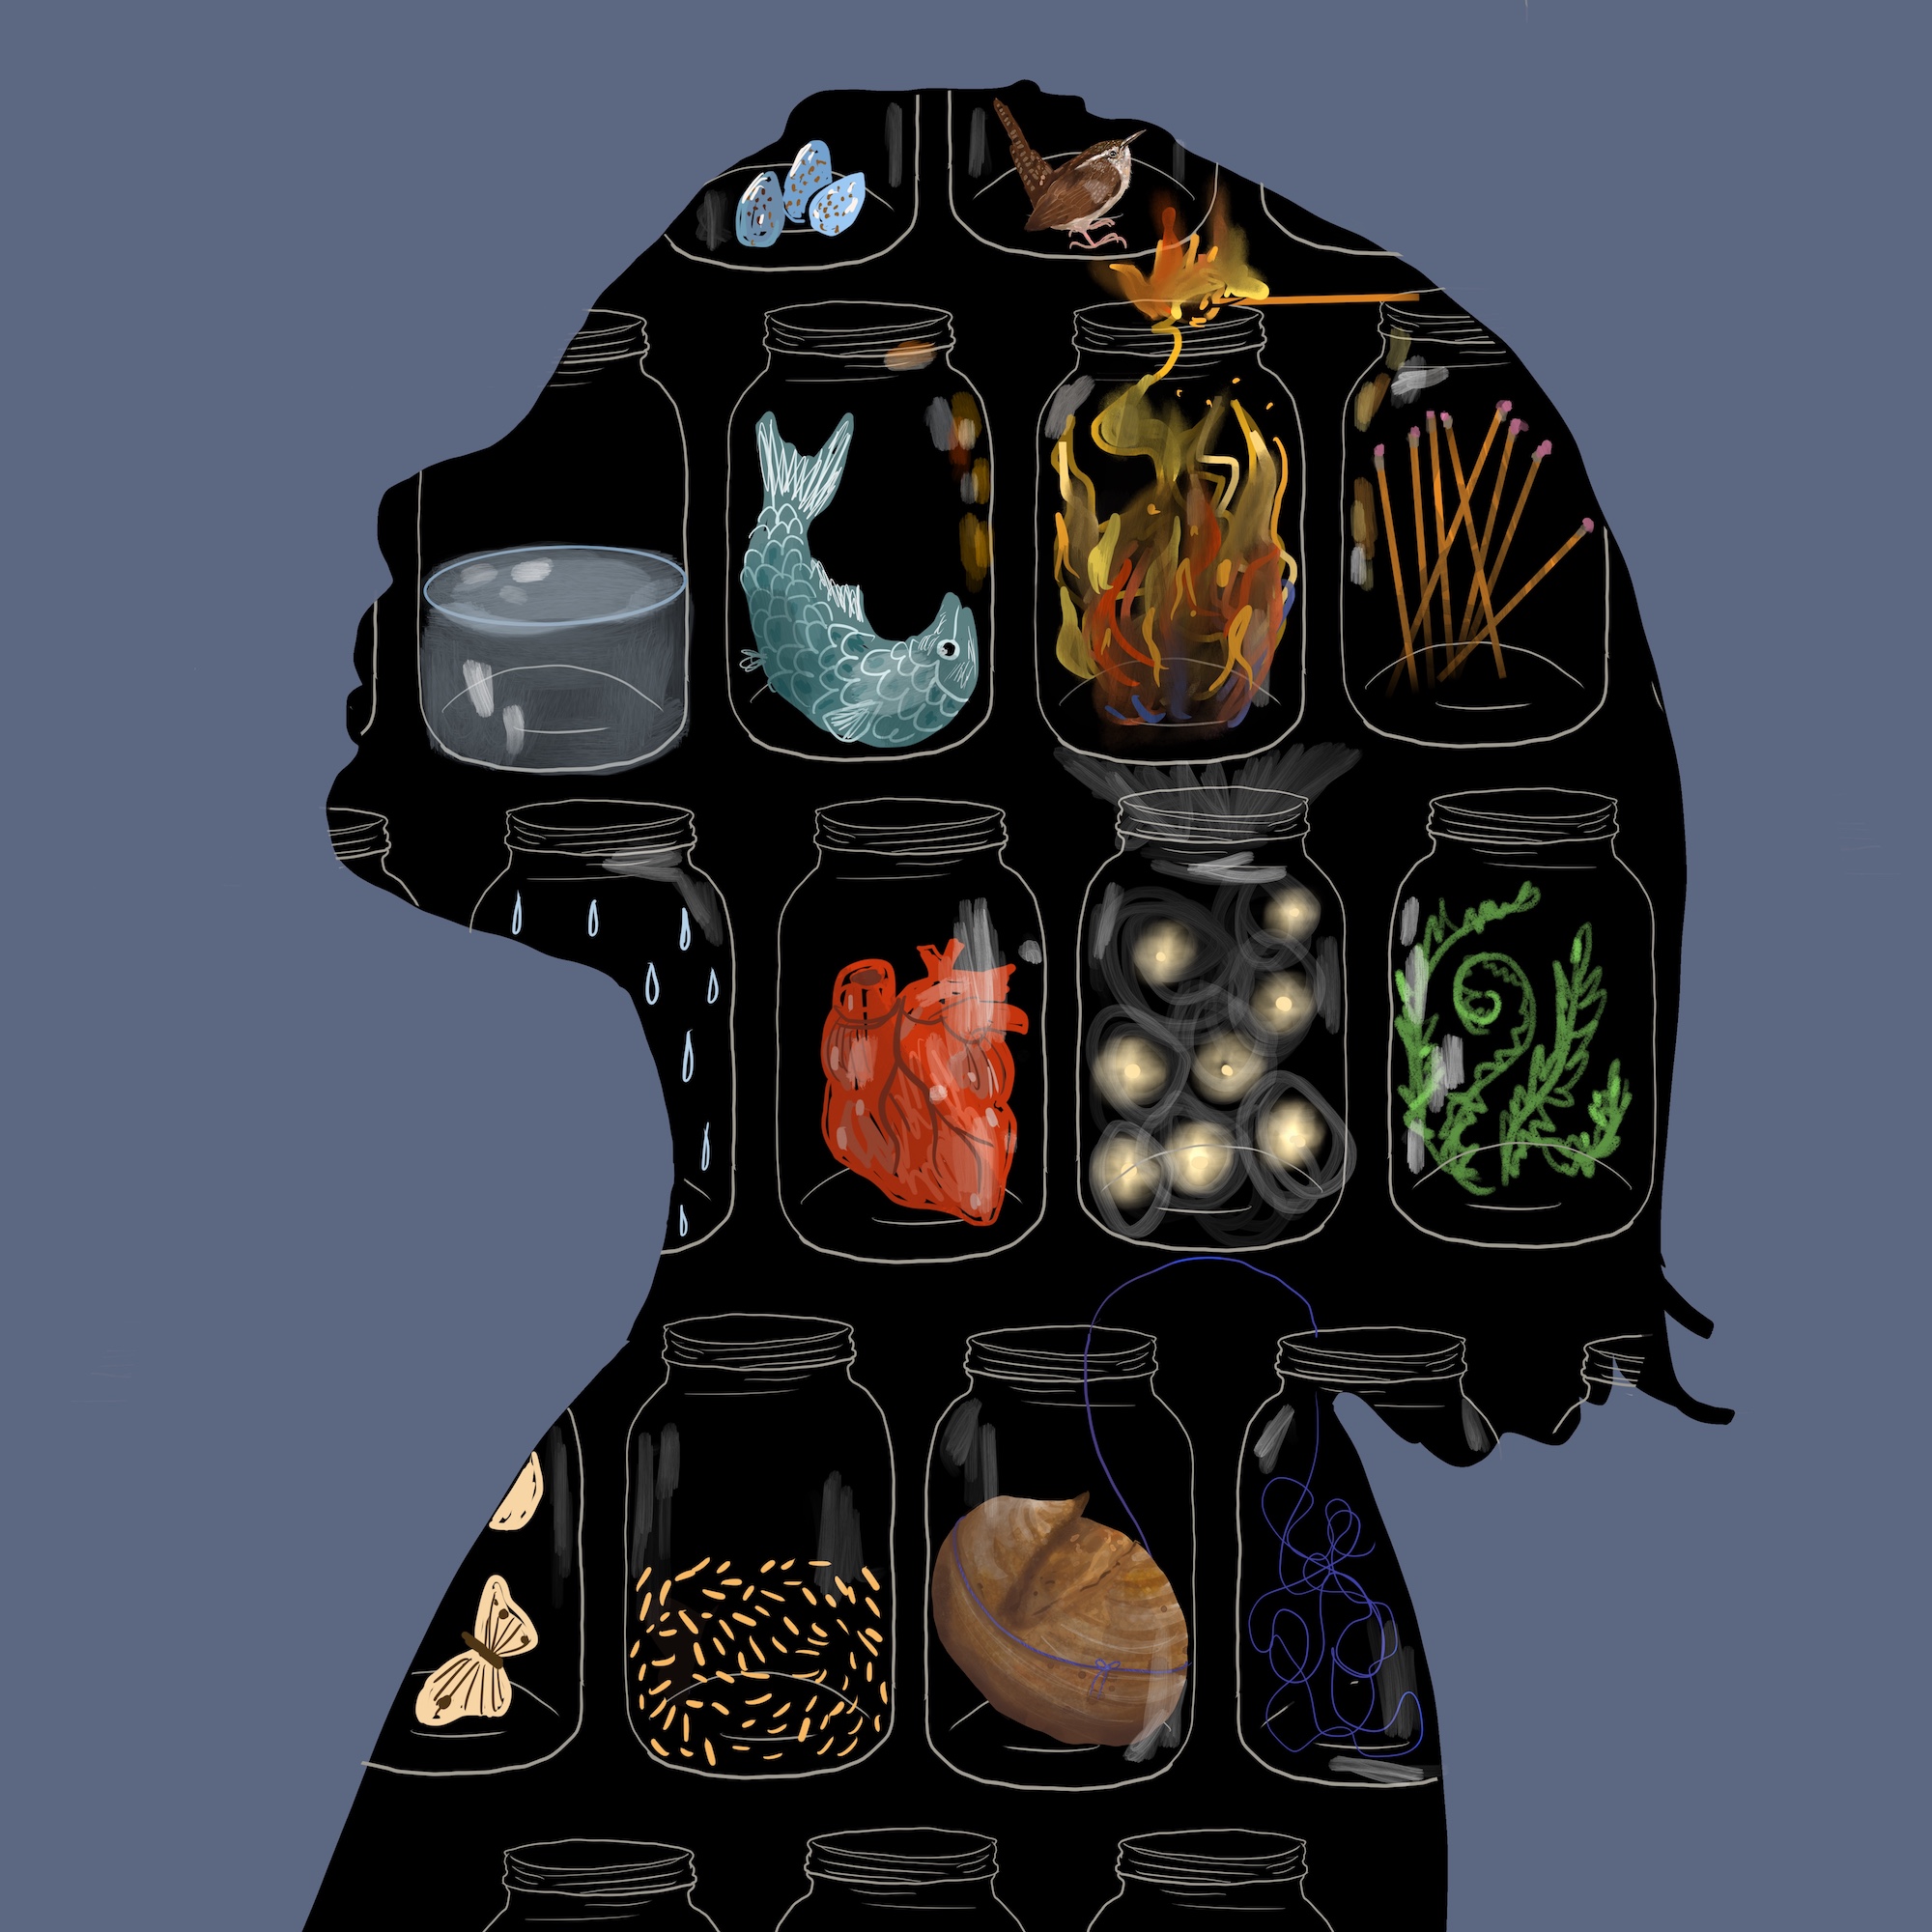 Illustration of a child's silhouette with jars filling the silhouette and different objects in each jar including a fish, a heart, butterfly, loaf of bread